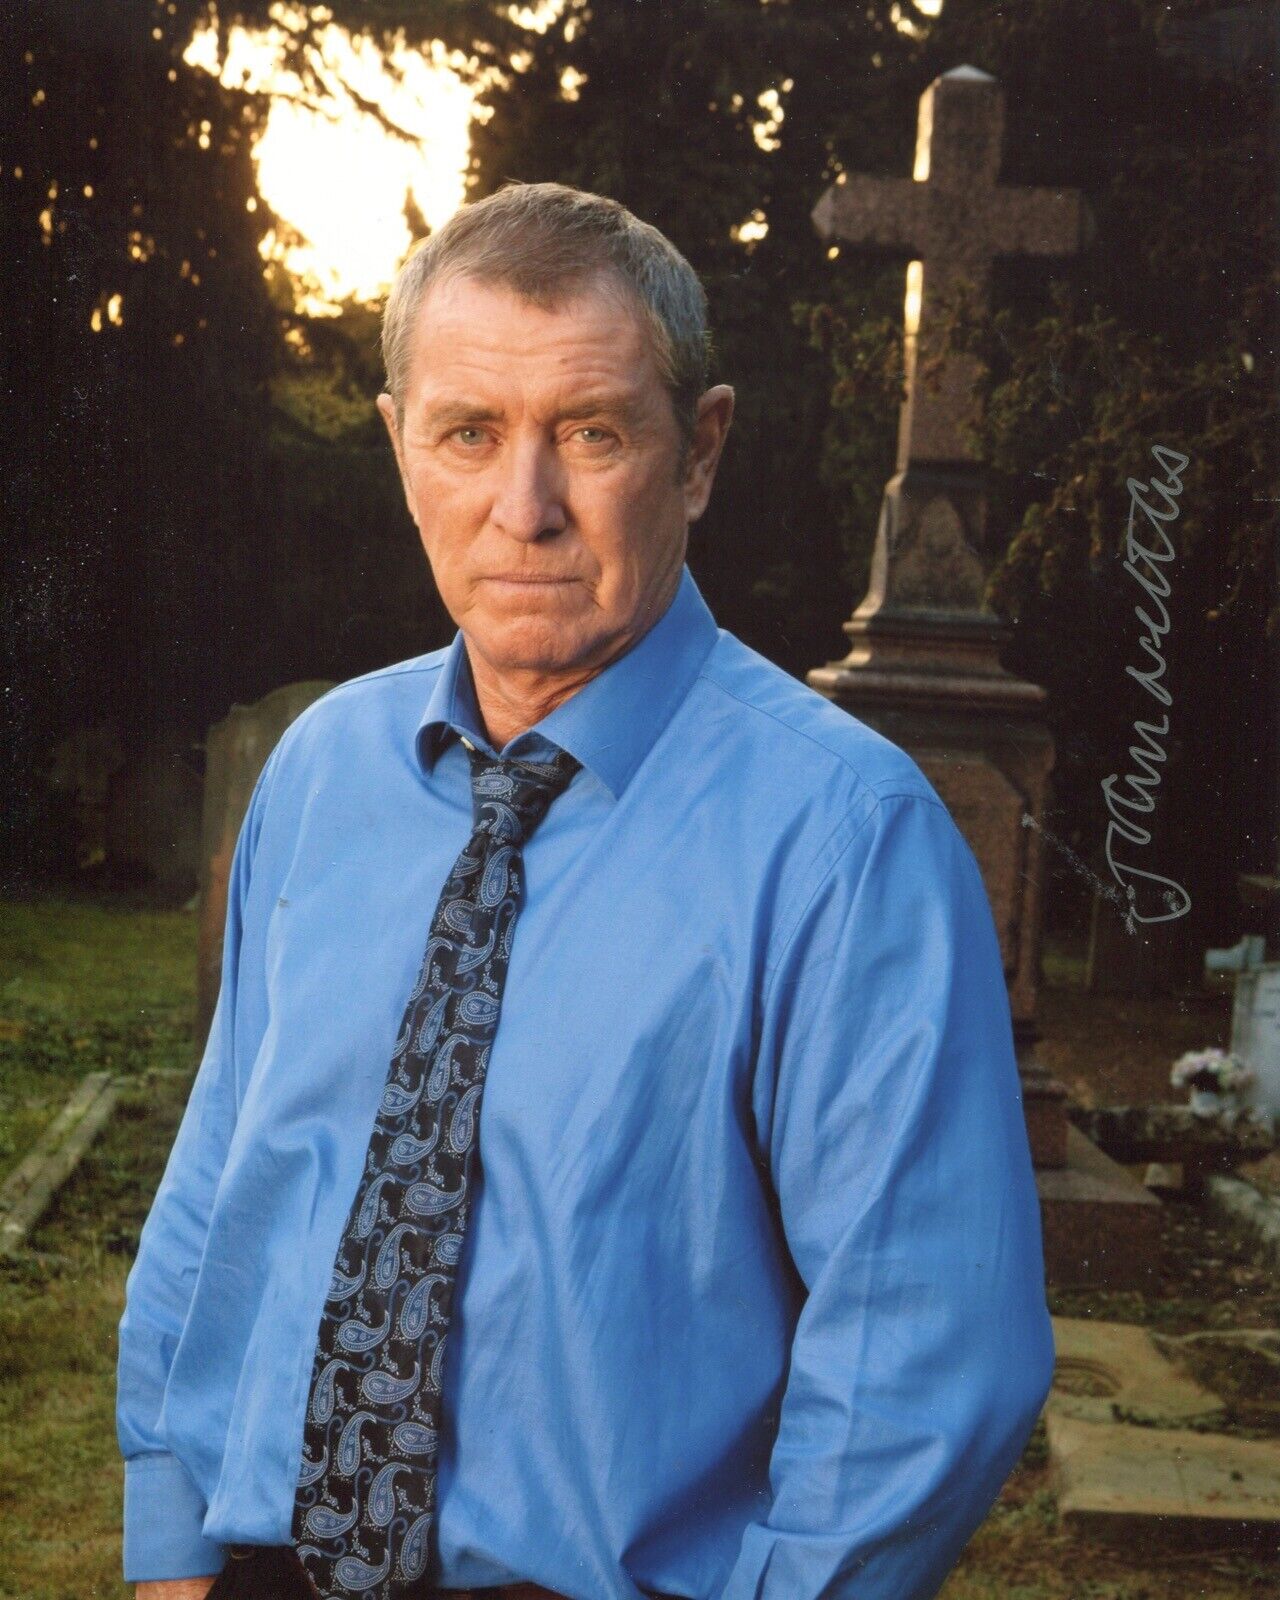 Midsomer Murders 8x10 TV detective Photo Poster painting signed by actor John Nettles IMAGE No2